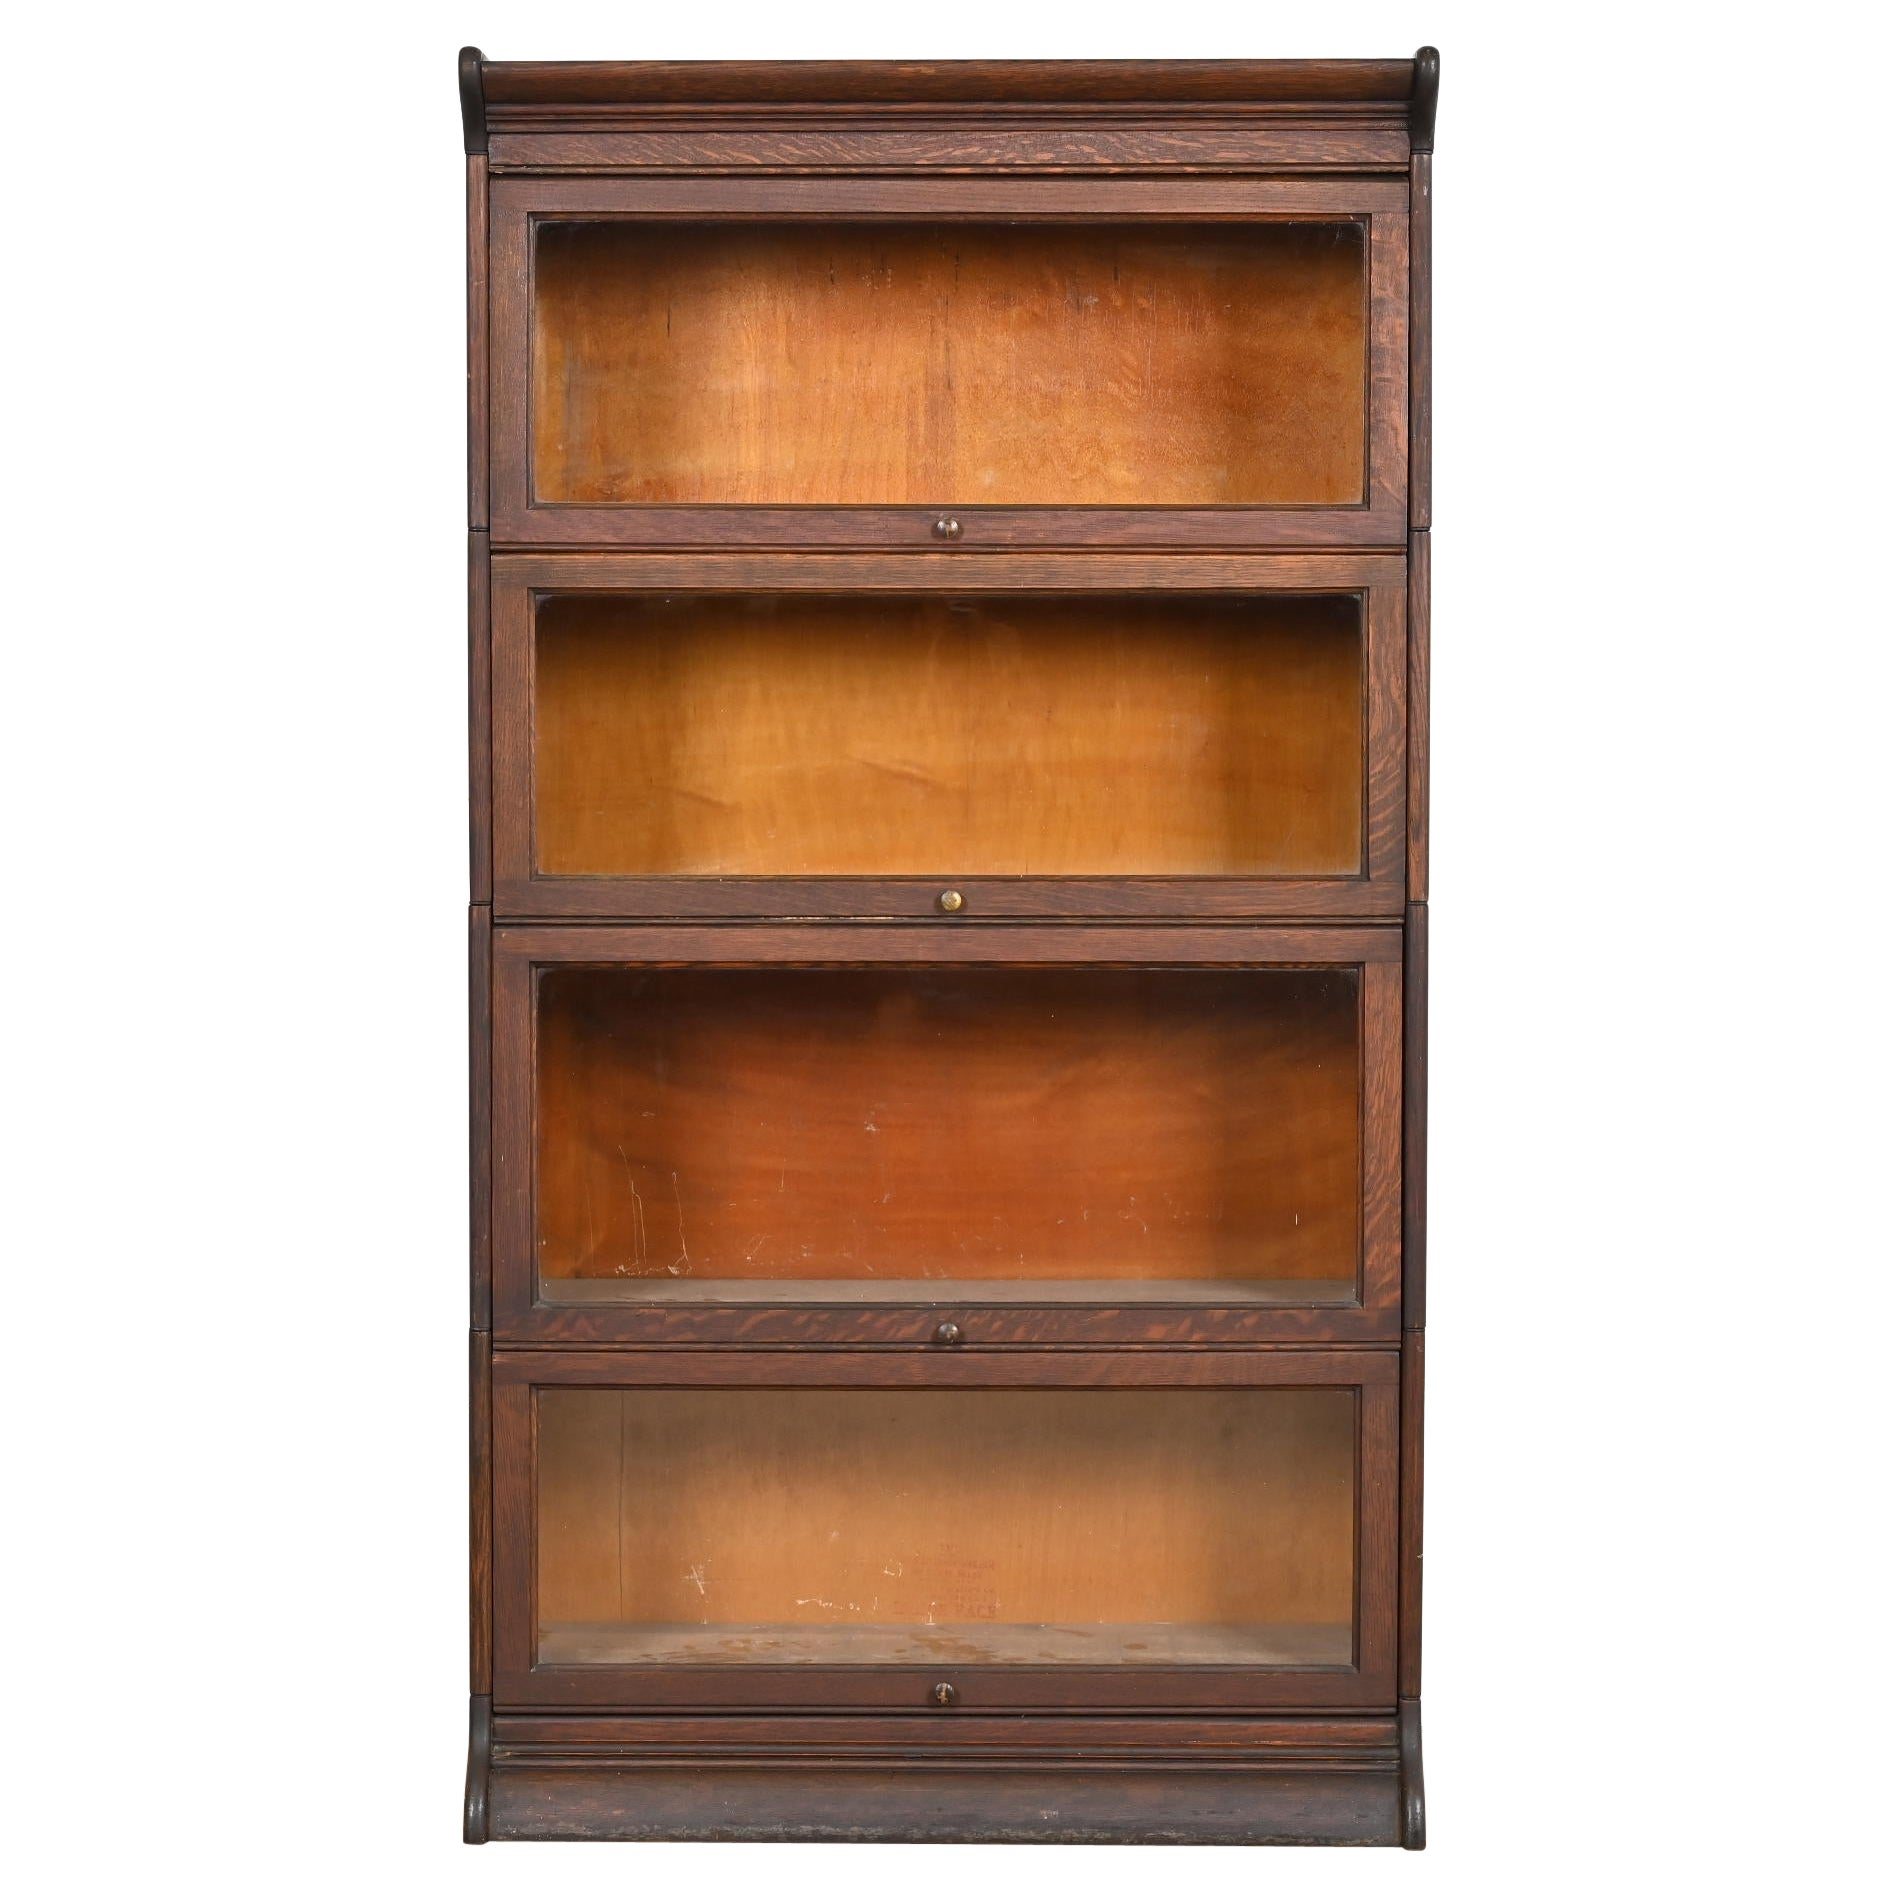 Antique Arts & Crafts Oak Four-Stack Barrister Bookcase by Gunn, circa 1920s